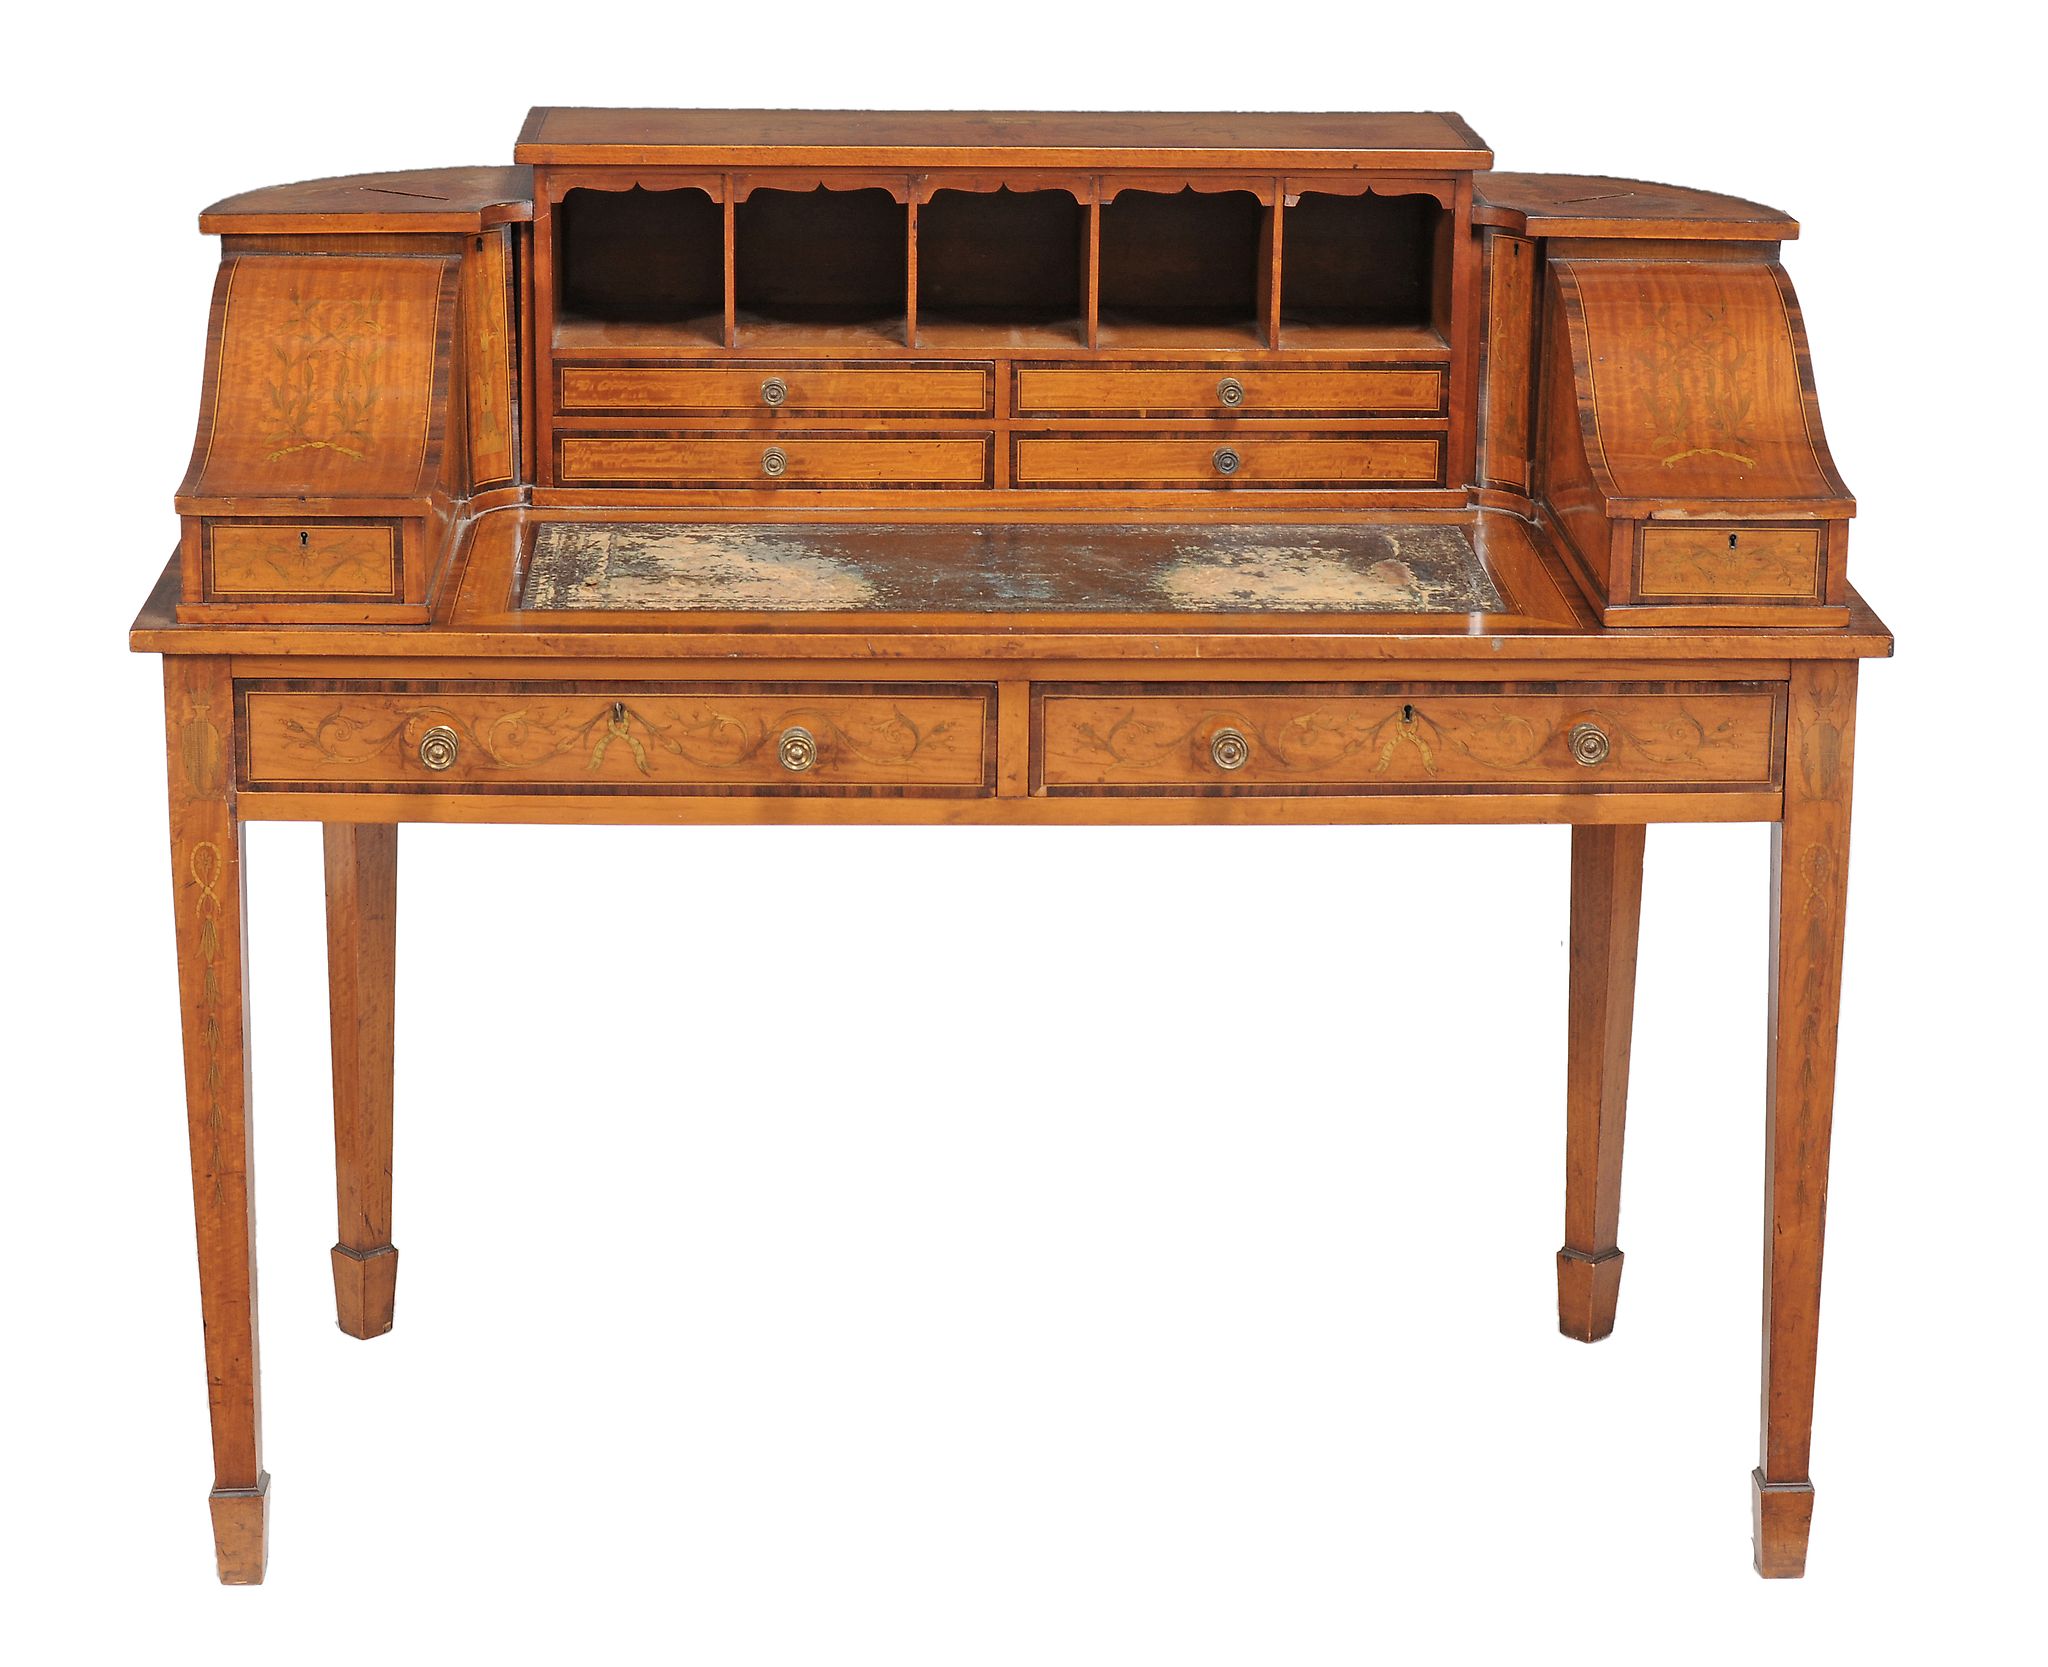 A George III satinwood, marquetry and rosewood crossbanded Carlton House desk, circa 1790, with an